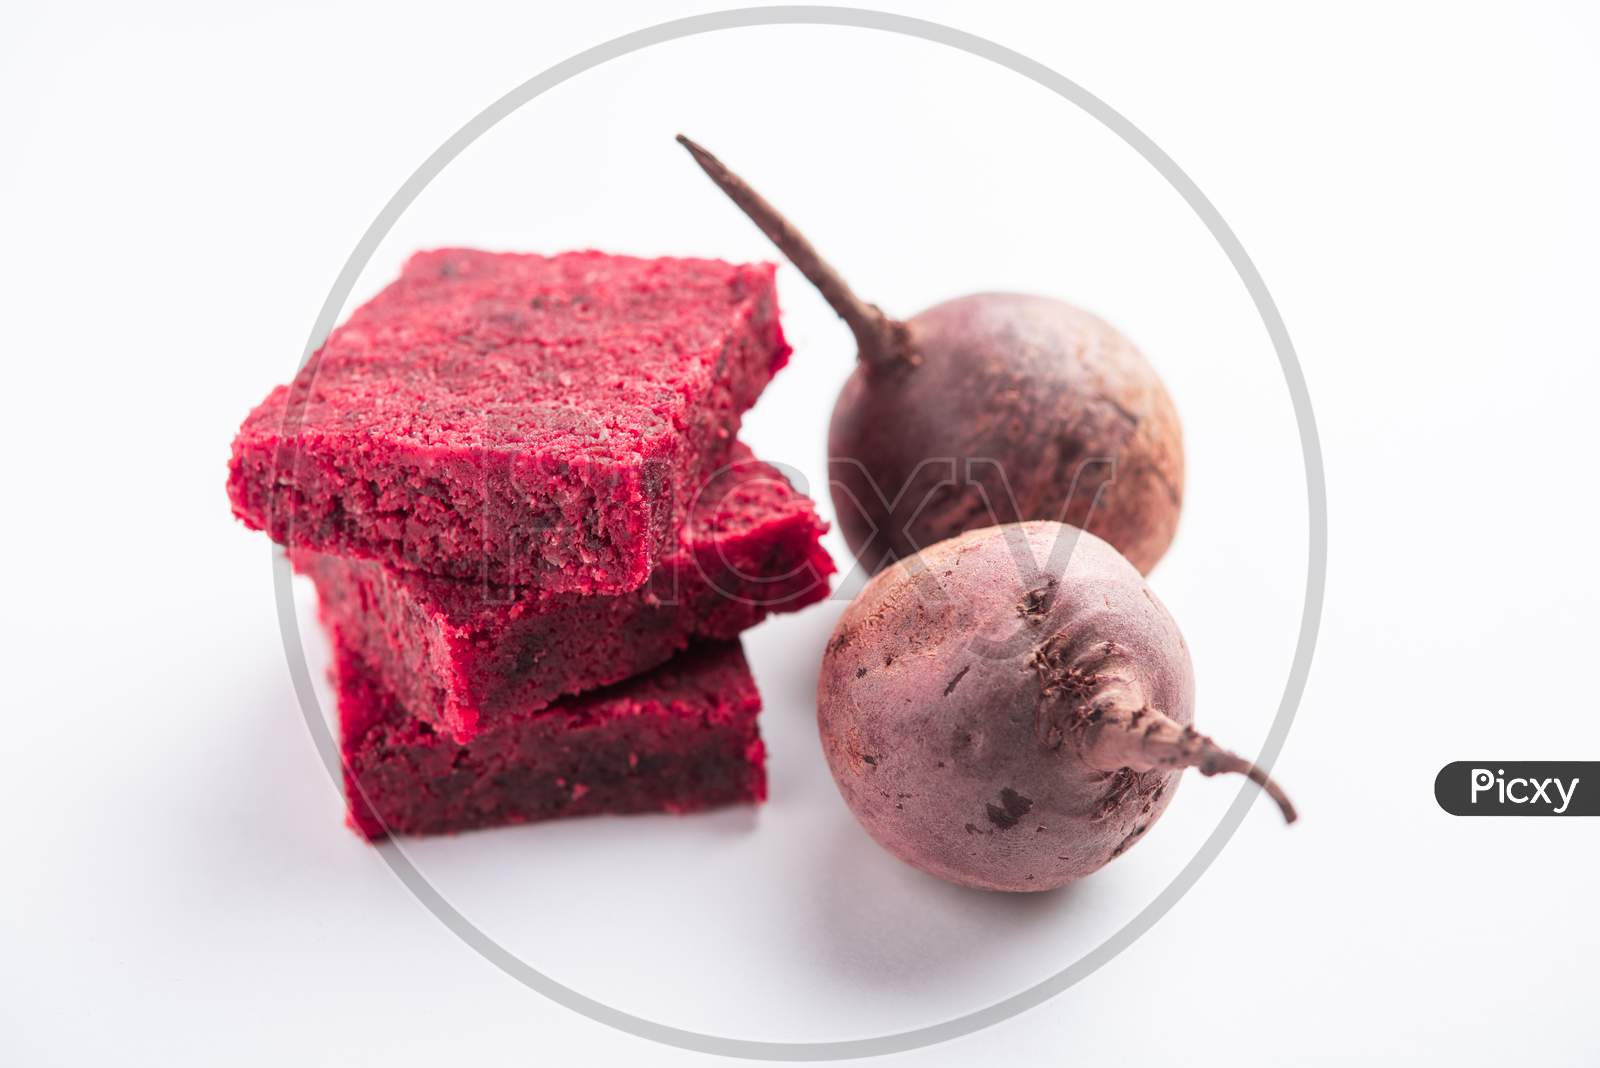 Beetroot Barfi Or Barfee Or Burfi Is An Indian Healthy Sweet With Raw Root Vegetable